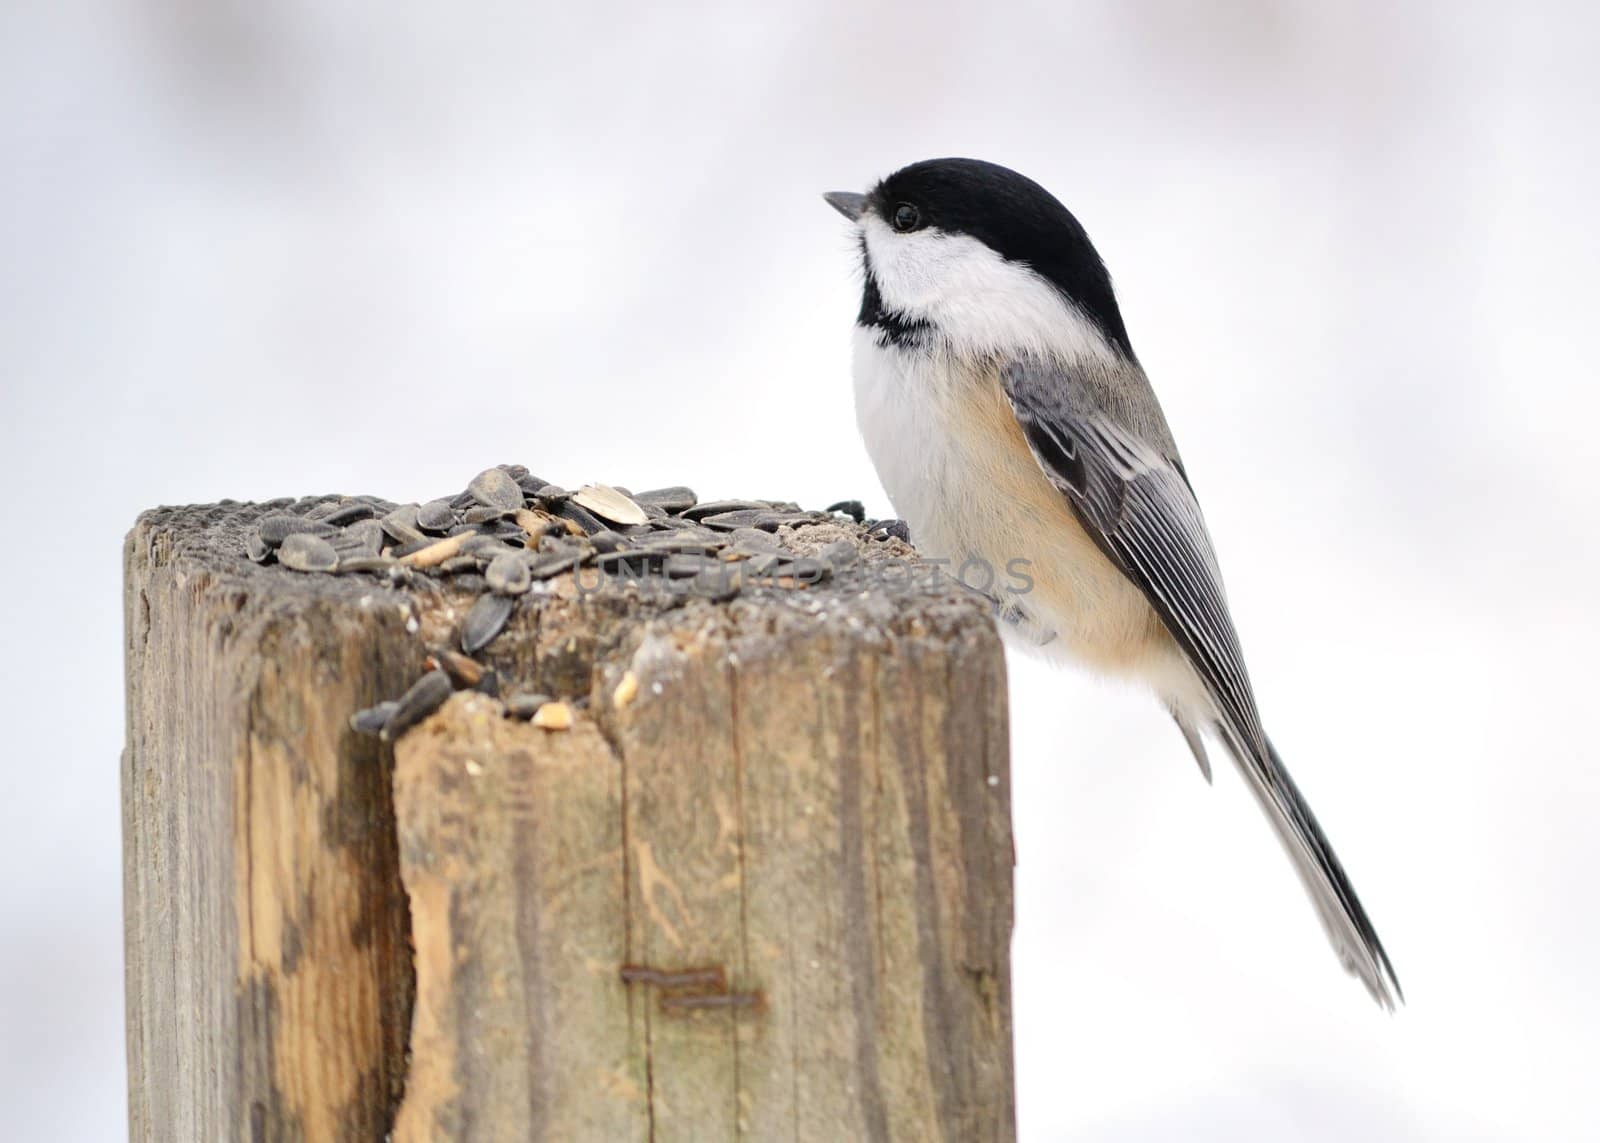 A black-capped chickadee perched on a post.